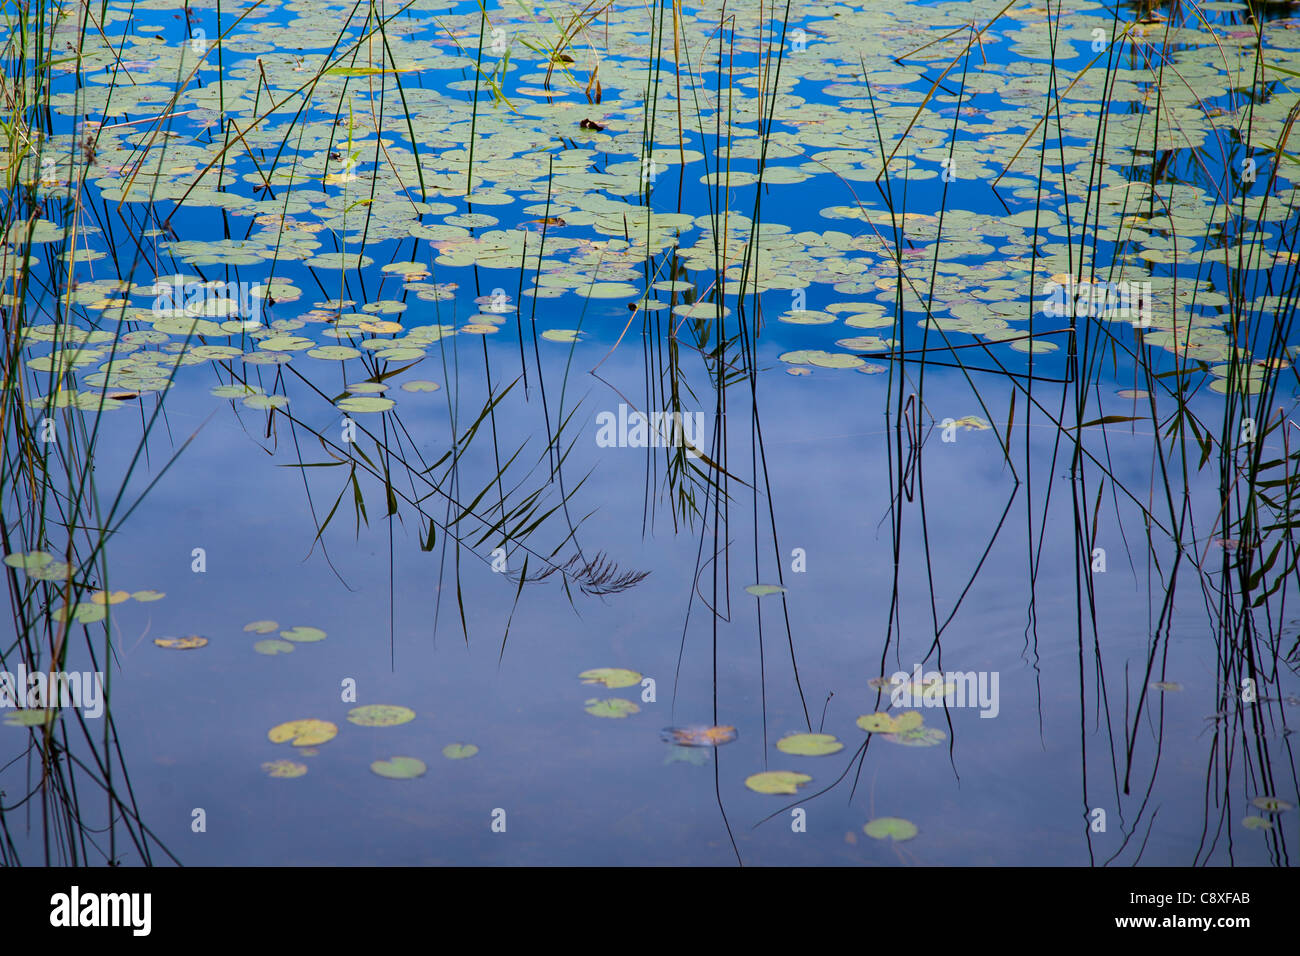 Pond with reeds and water lilies Stock Photo